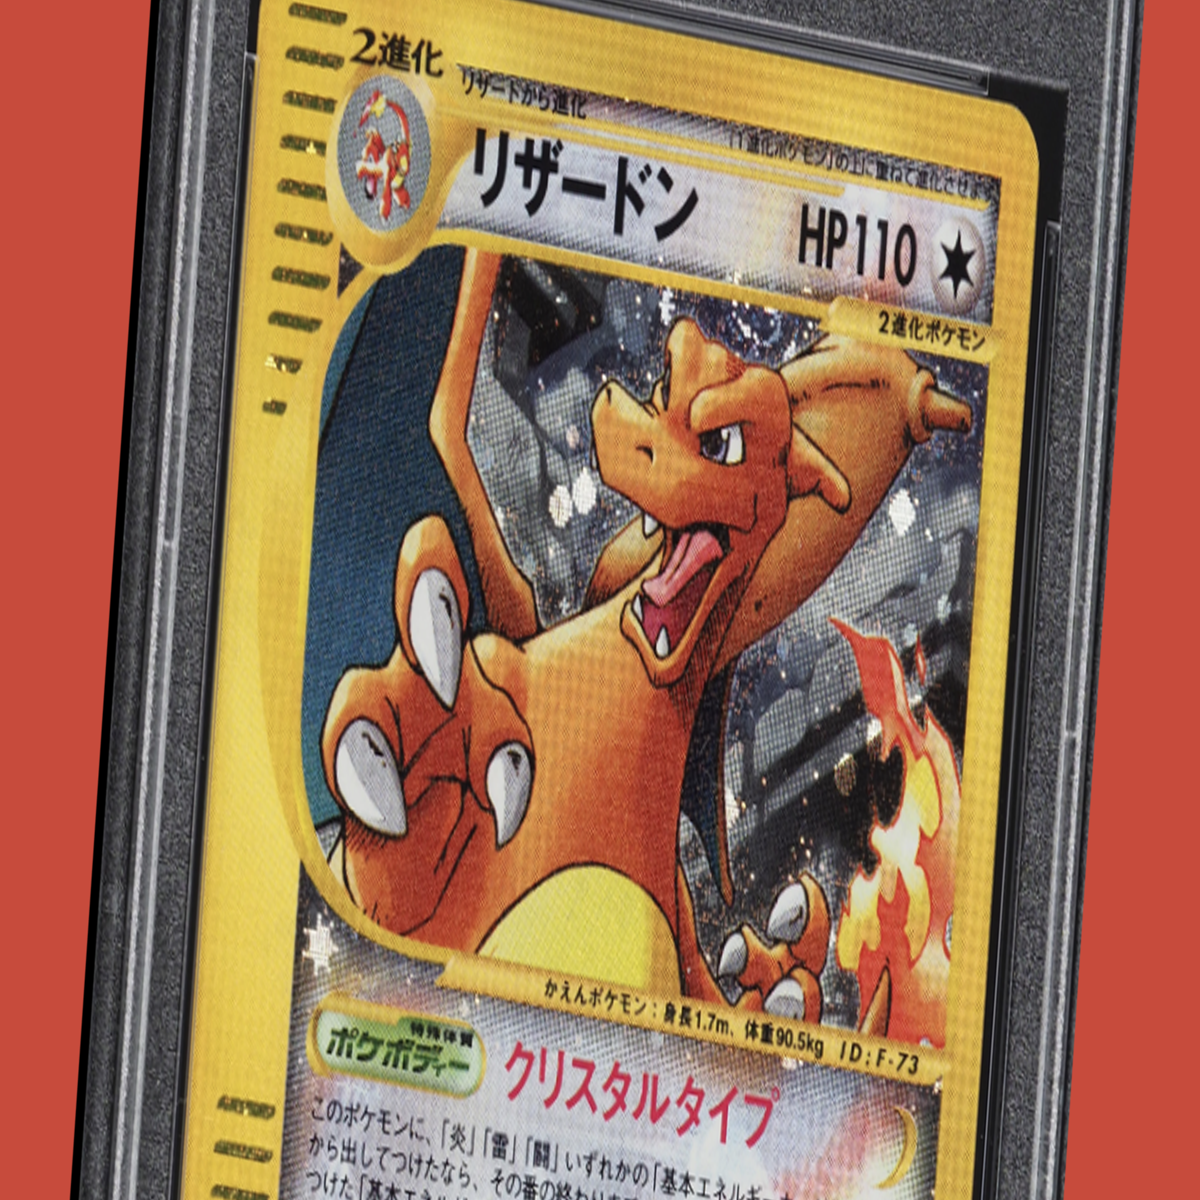 Another first-edition shiny Charizard Pokémon card has sold for